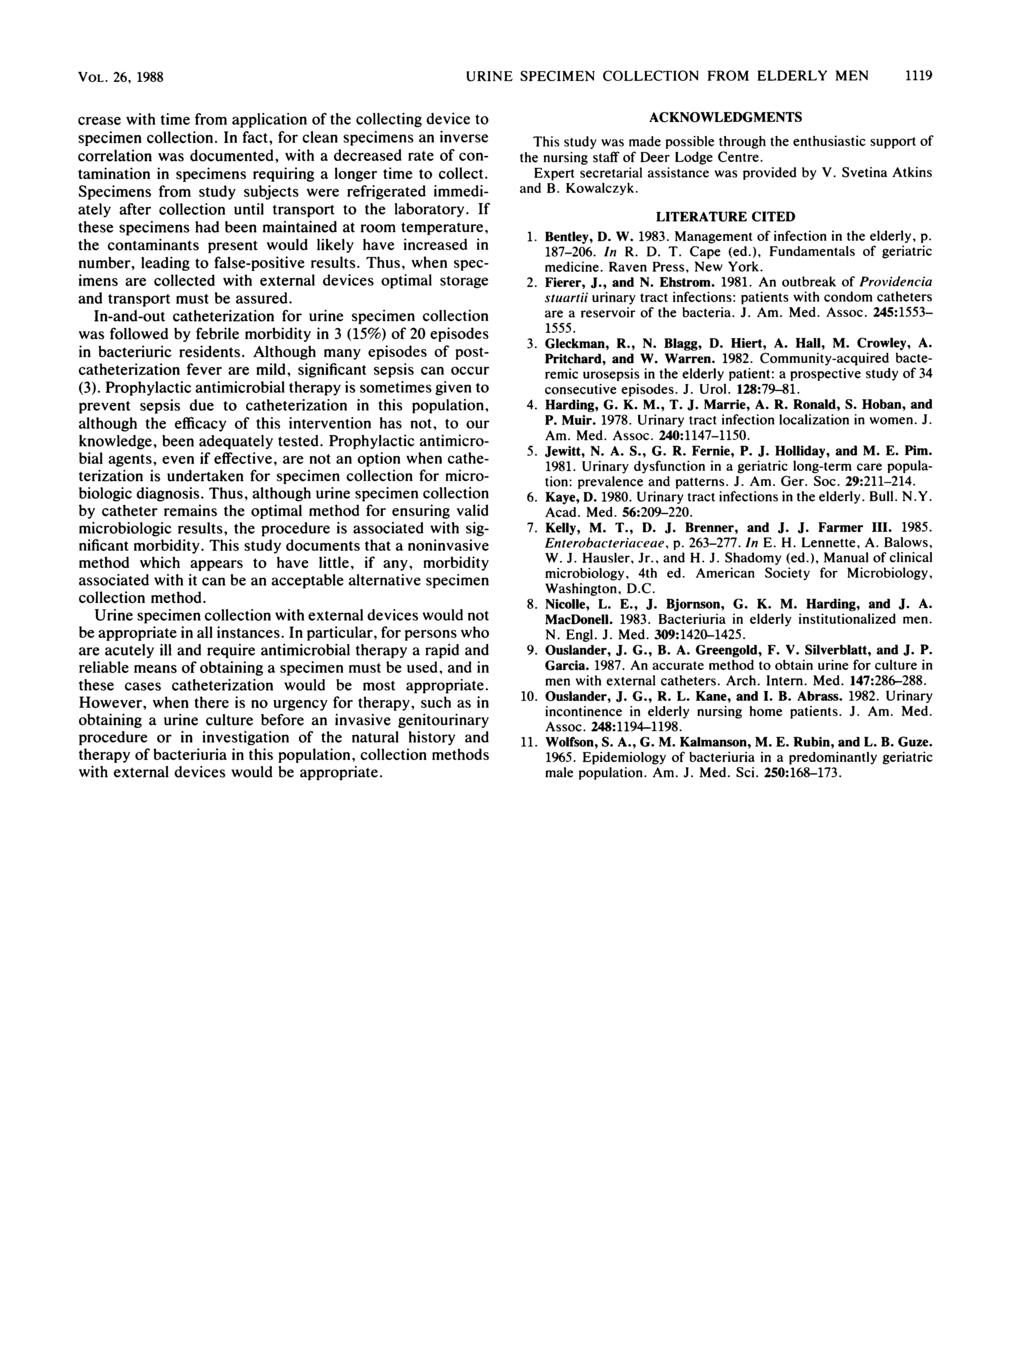 VOL. 26, 1988 URINE SPECIMEN COLLECTION FROM ELDERLY MEN 1119 crease with time from application of the collecting device to specimen collection.